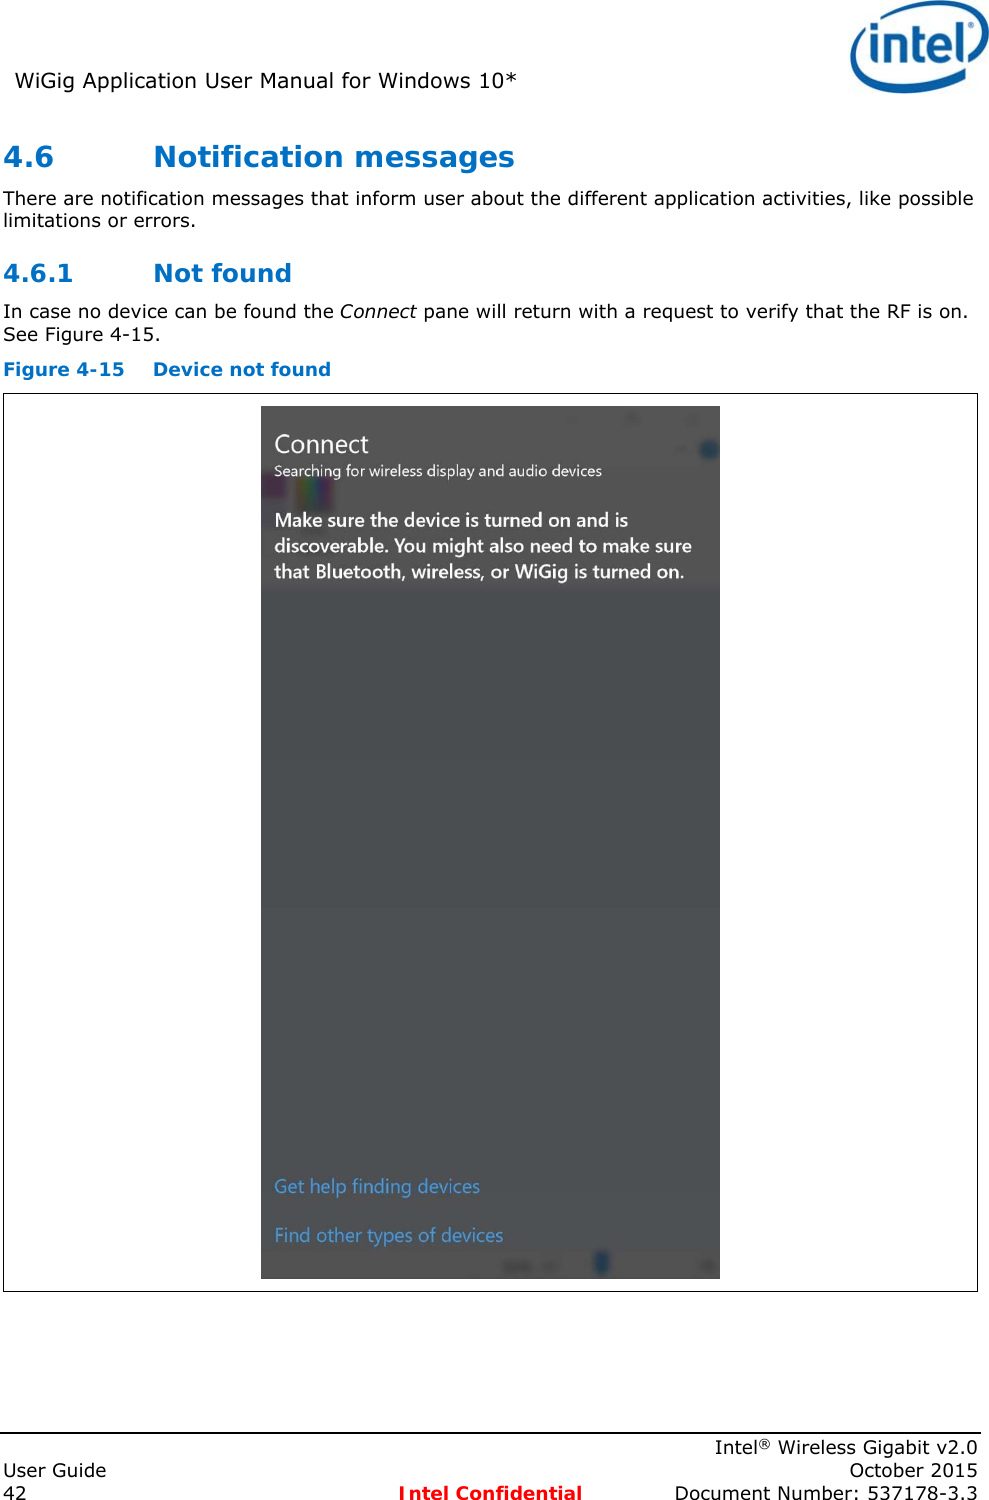 WiGig Application User Manual for Windows 10*      Intel® Wireless Gigabit v2.0 User Guide    October 2015 42 Intel Confidential  Document Number: 537178-3.3 4.6 Notification messages  There are notification messages that inform user about the different application activities, like possible limitations or errors.  4.6.1 Not found In case no device can be found the Connect pane will return with a request to verify that the RF is on. See Figure 4-15. Figure 4-15  Device not found  